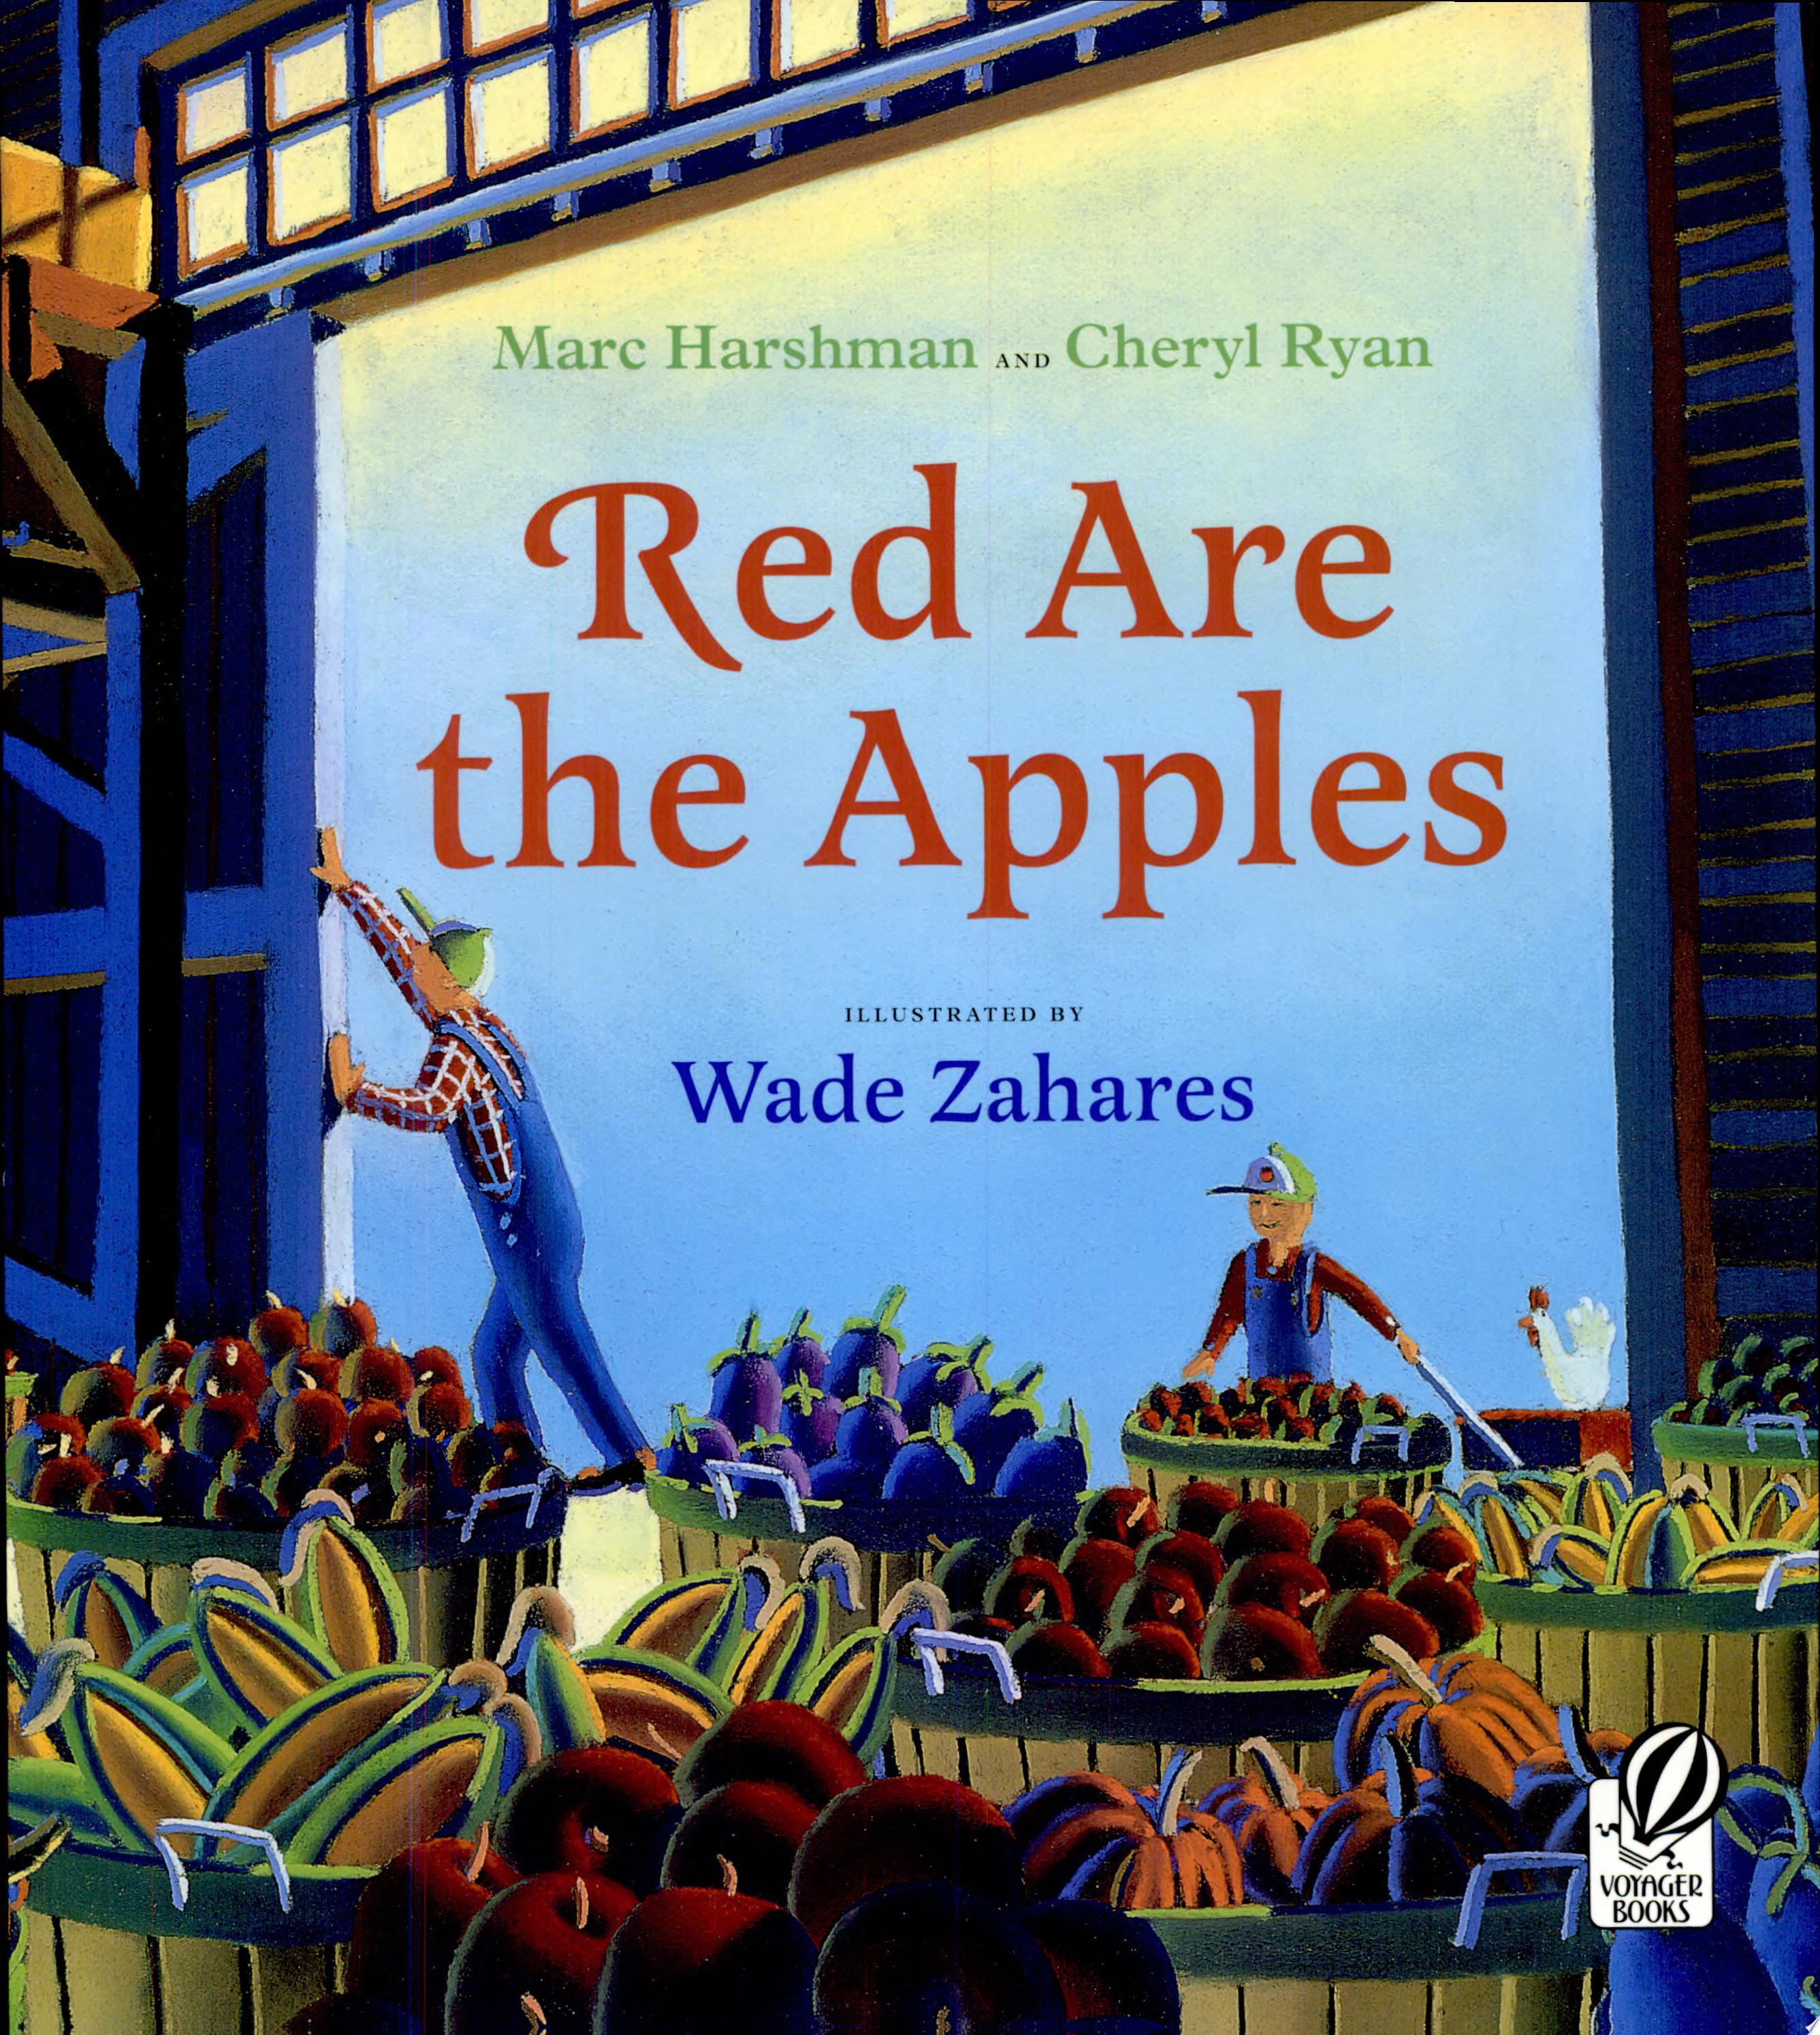 Image for "Red Are the Apples"